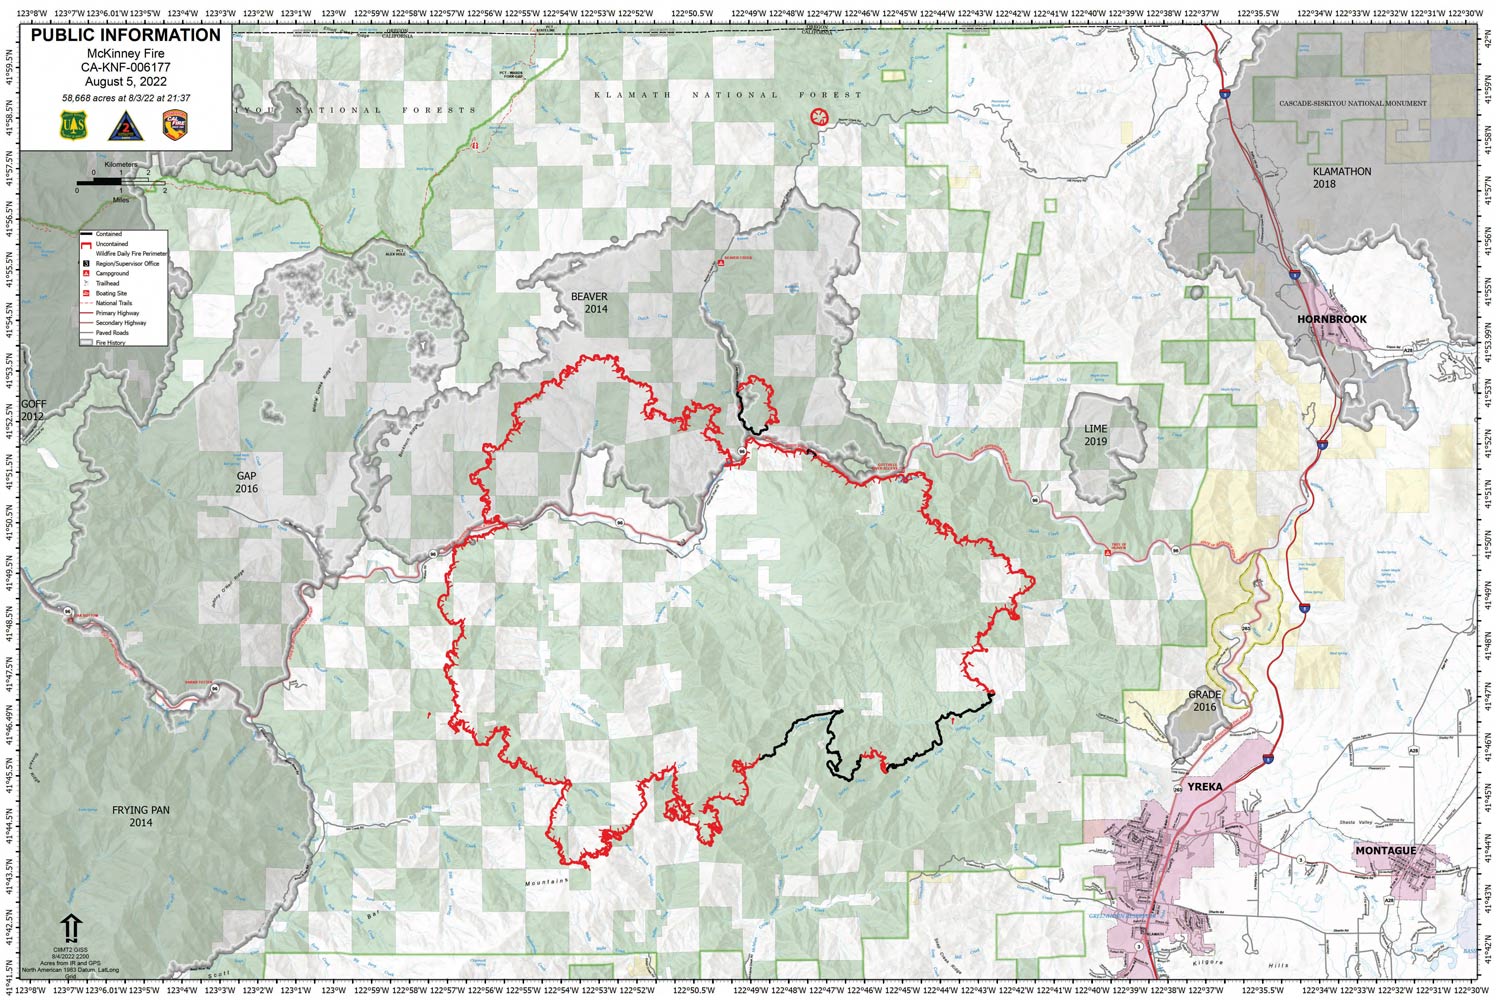 McKinney Fire in Siskiyou County Public Information and Infrared Maps